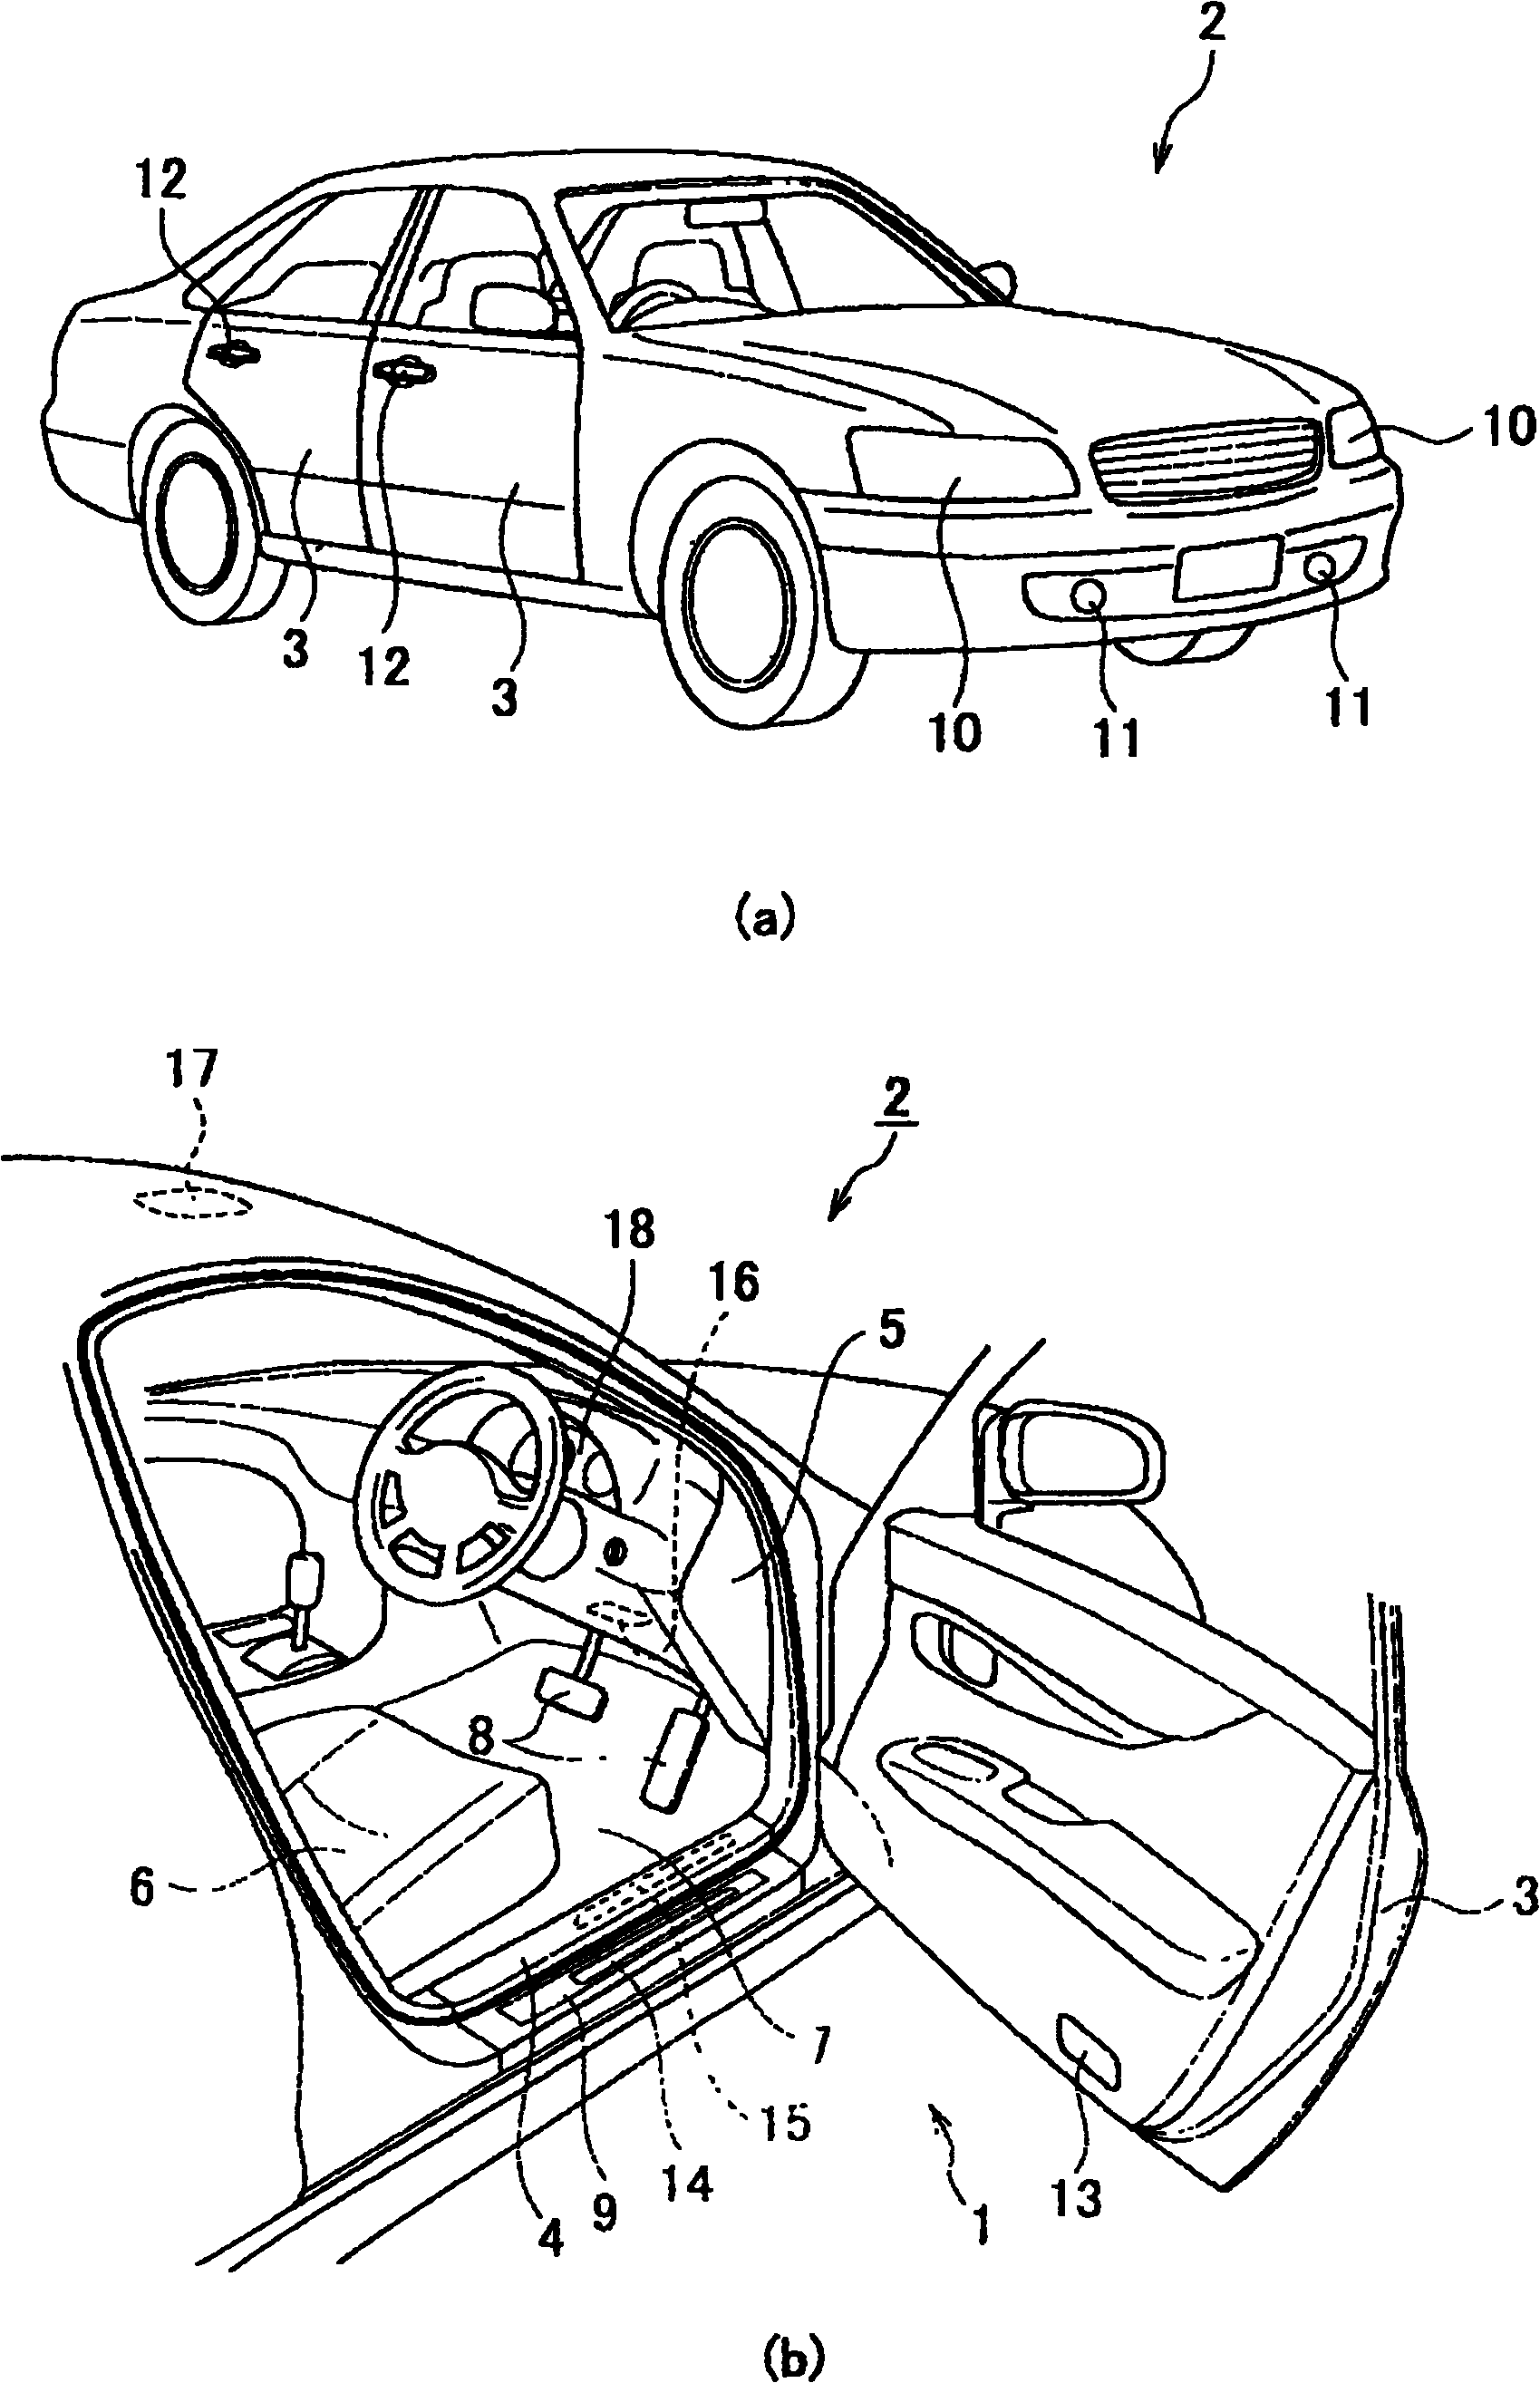 Lighting device for vehicle